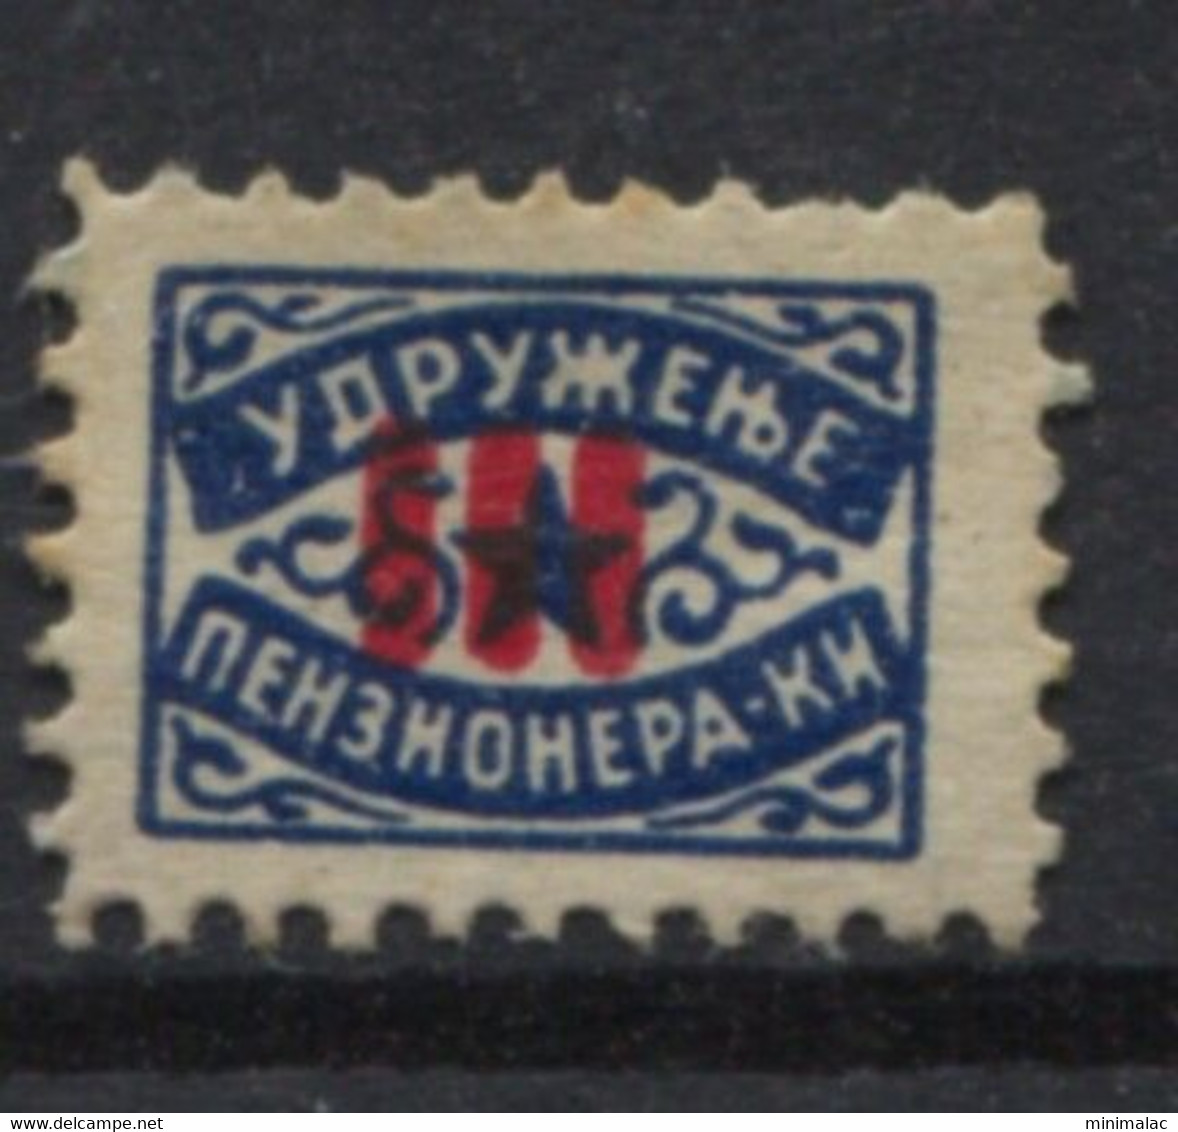 Yugoslavia 1951, Stamp For Membership, Retired Association, Star Administrative Stamp - Revenue, Overprinted With III - Officials